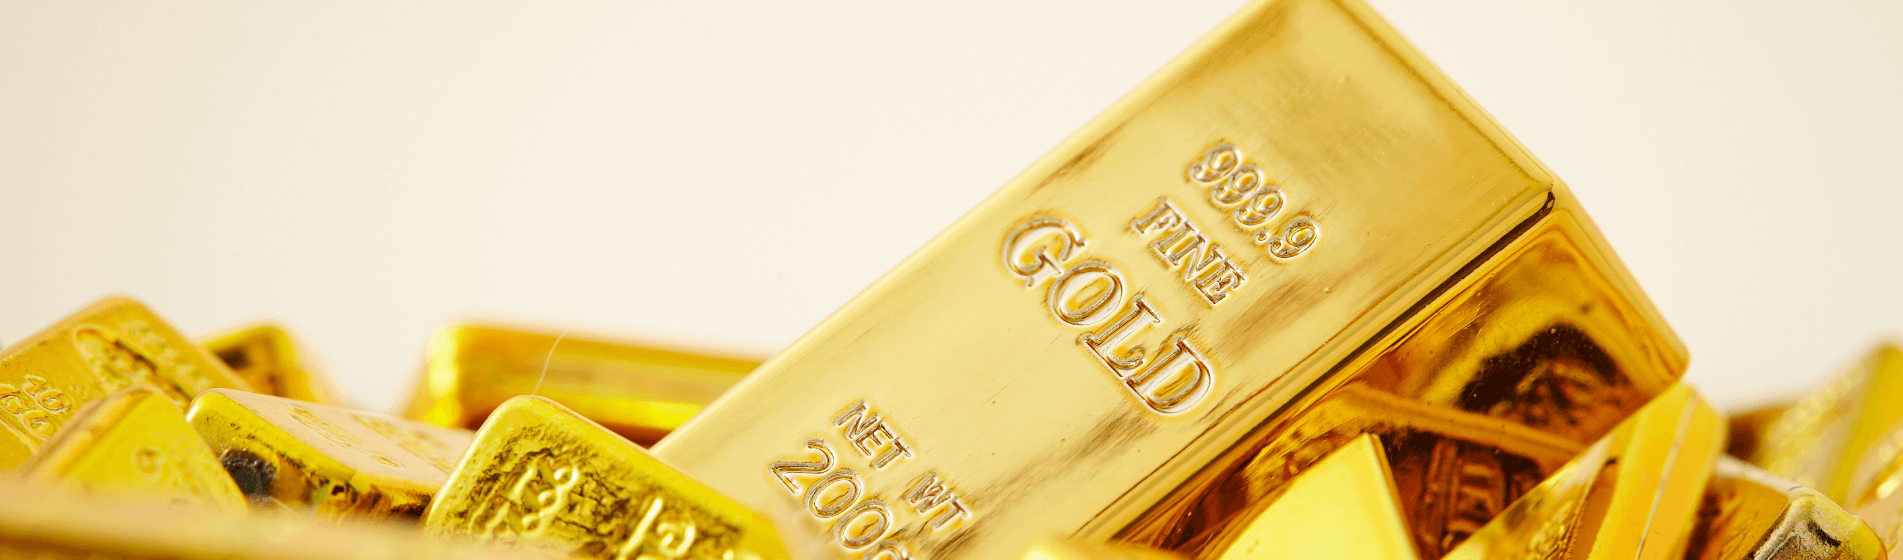 how to buy gold without the government knowing